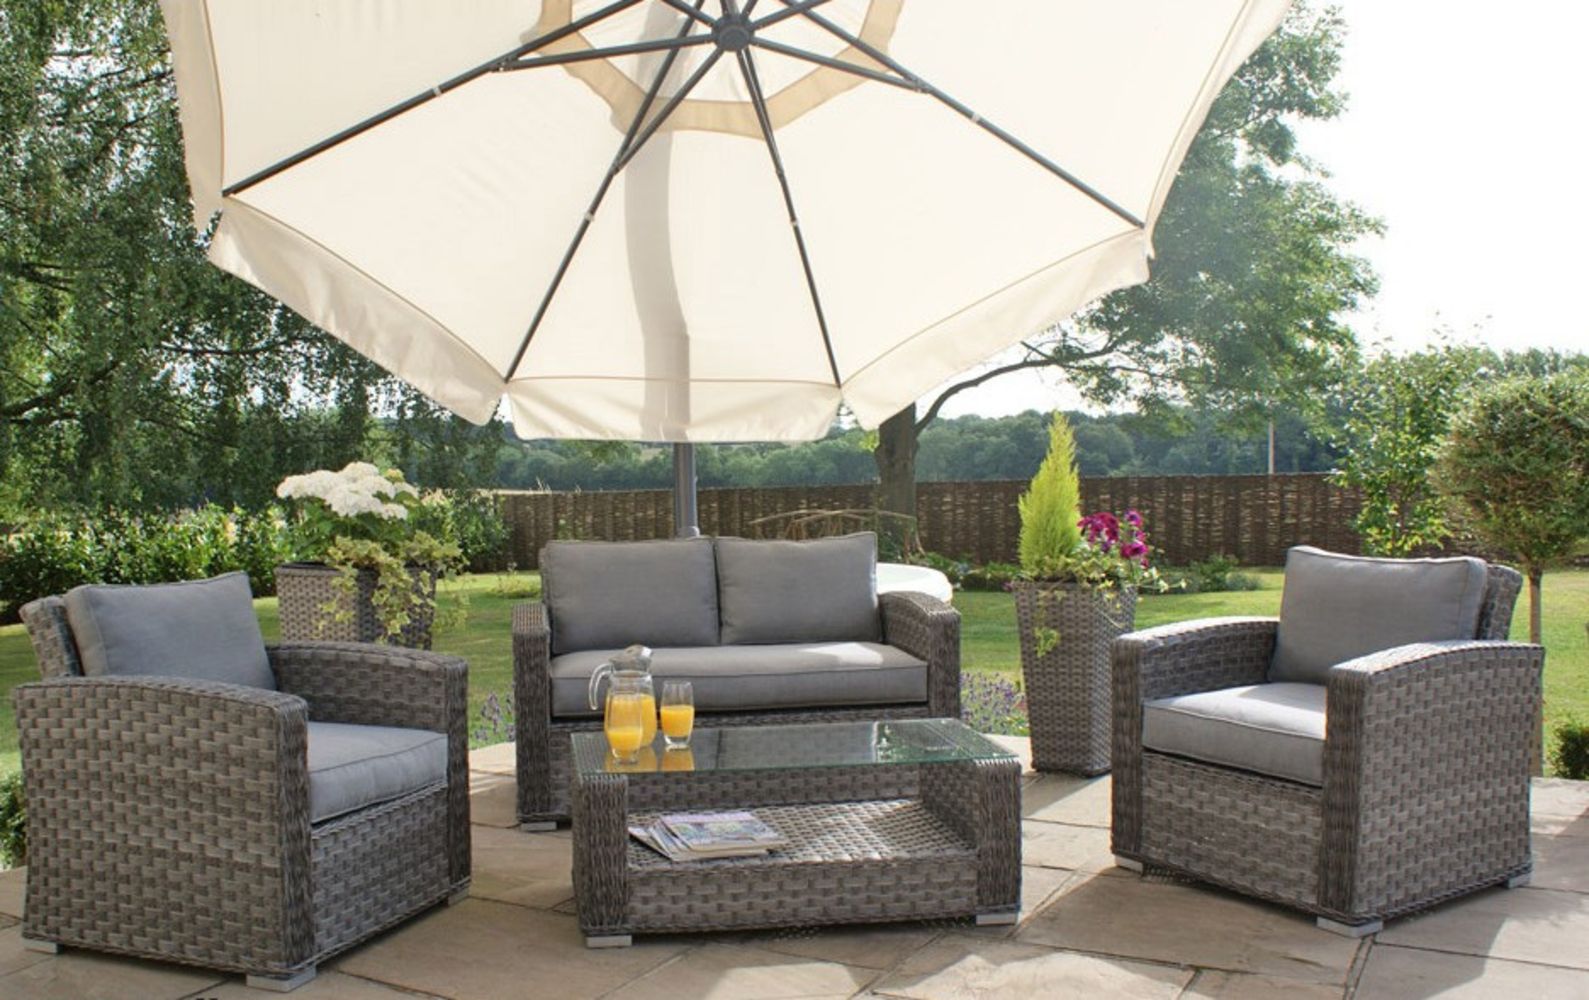 Brand New Exclusive Range Of Rattan Garden Furniture Inc Dining Sets, Sun Beds, Coffee Tables